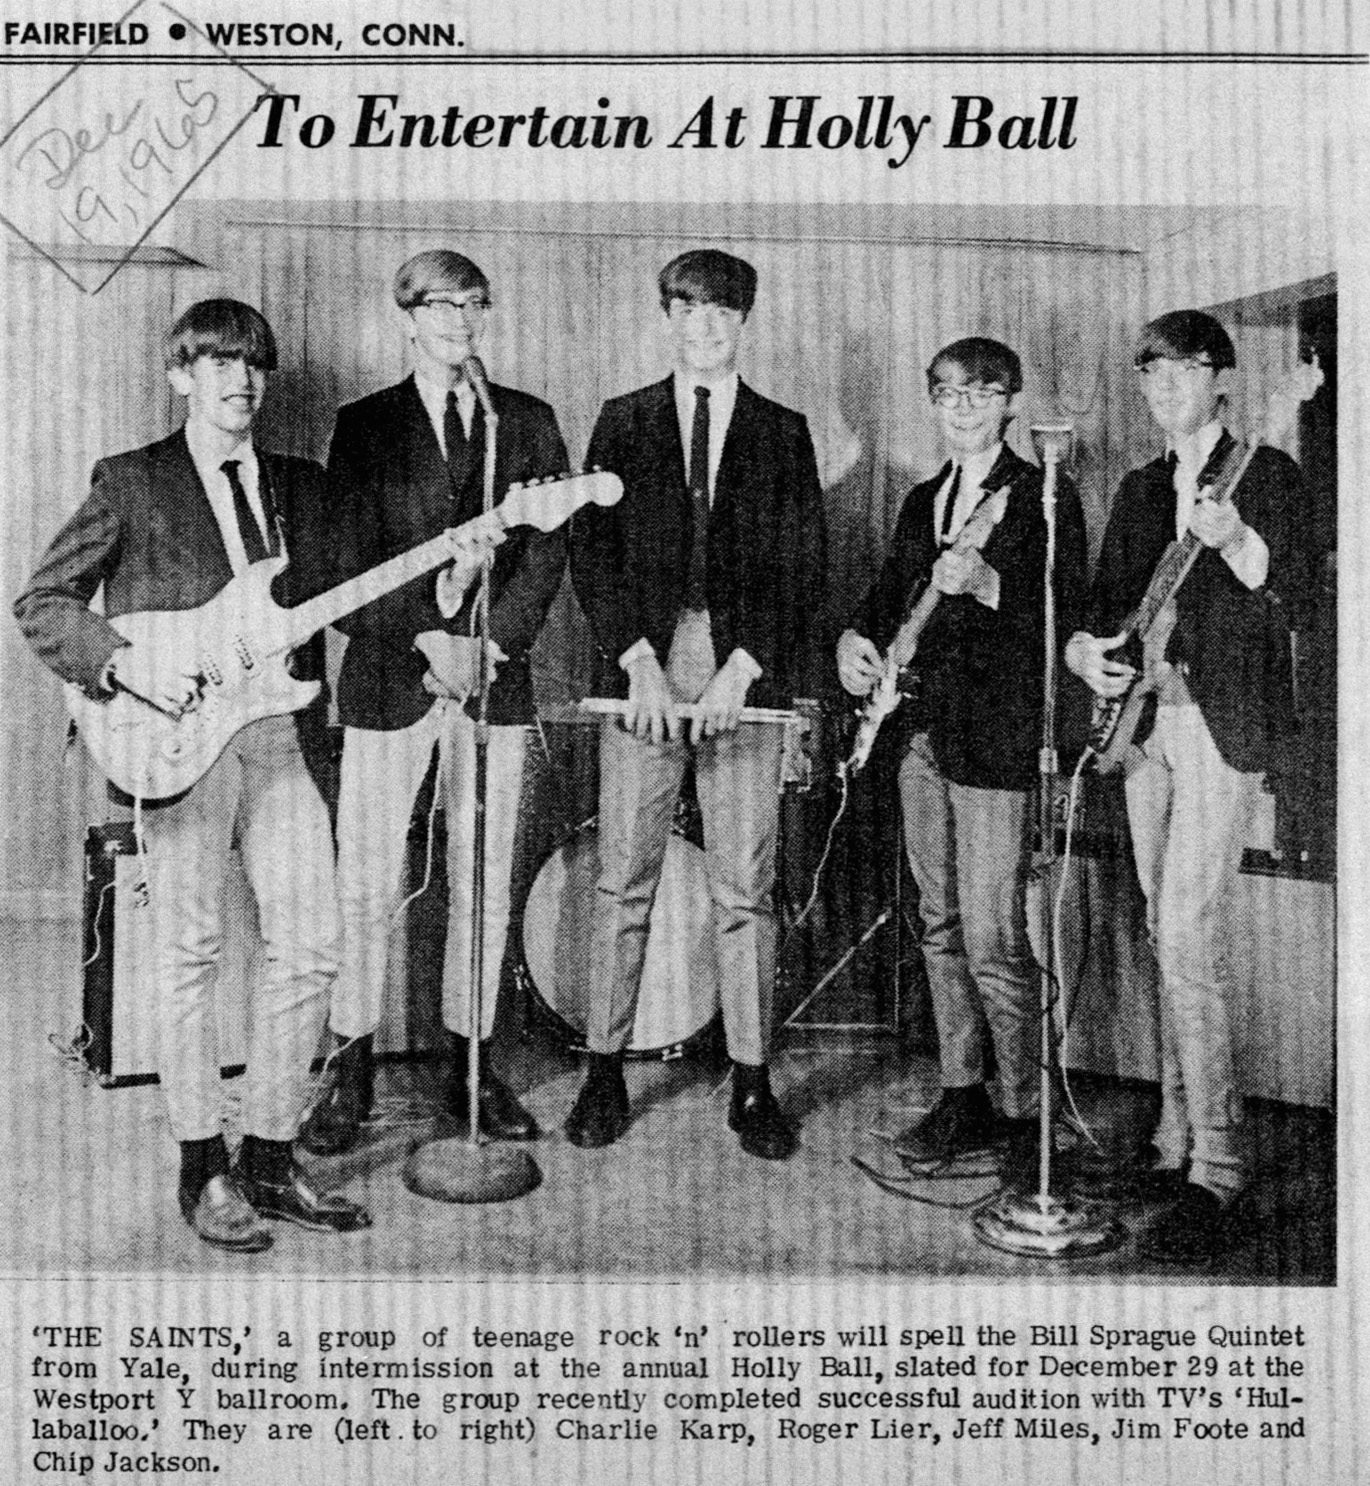 The Saints Rock Group From Westport Ct 1965